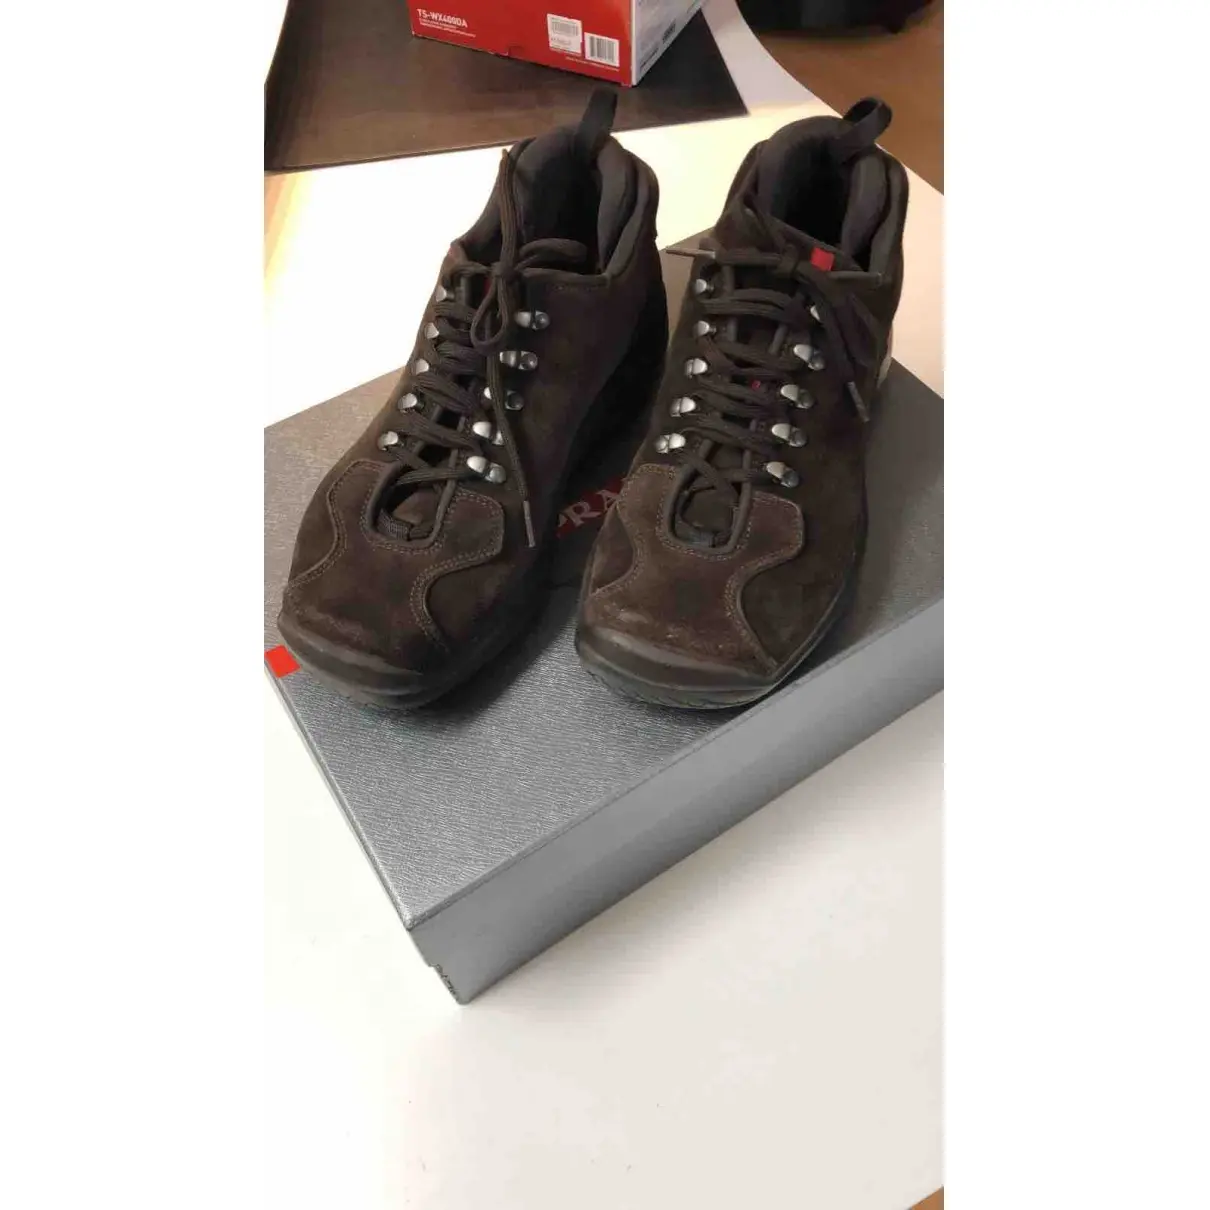 Prada Low trainers for sale - Vintage